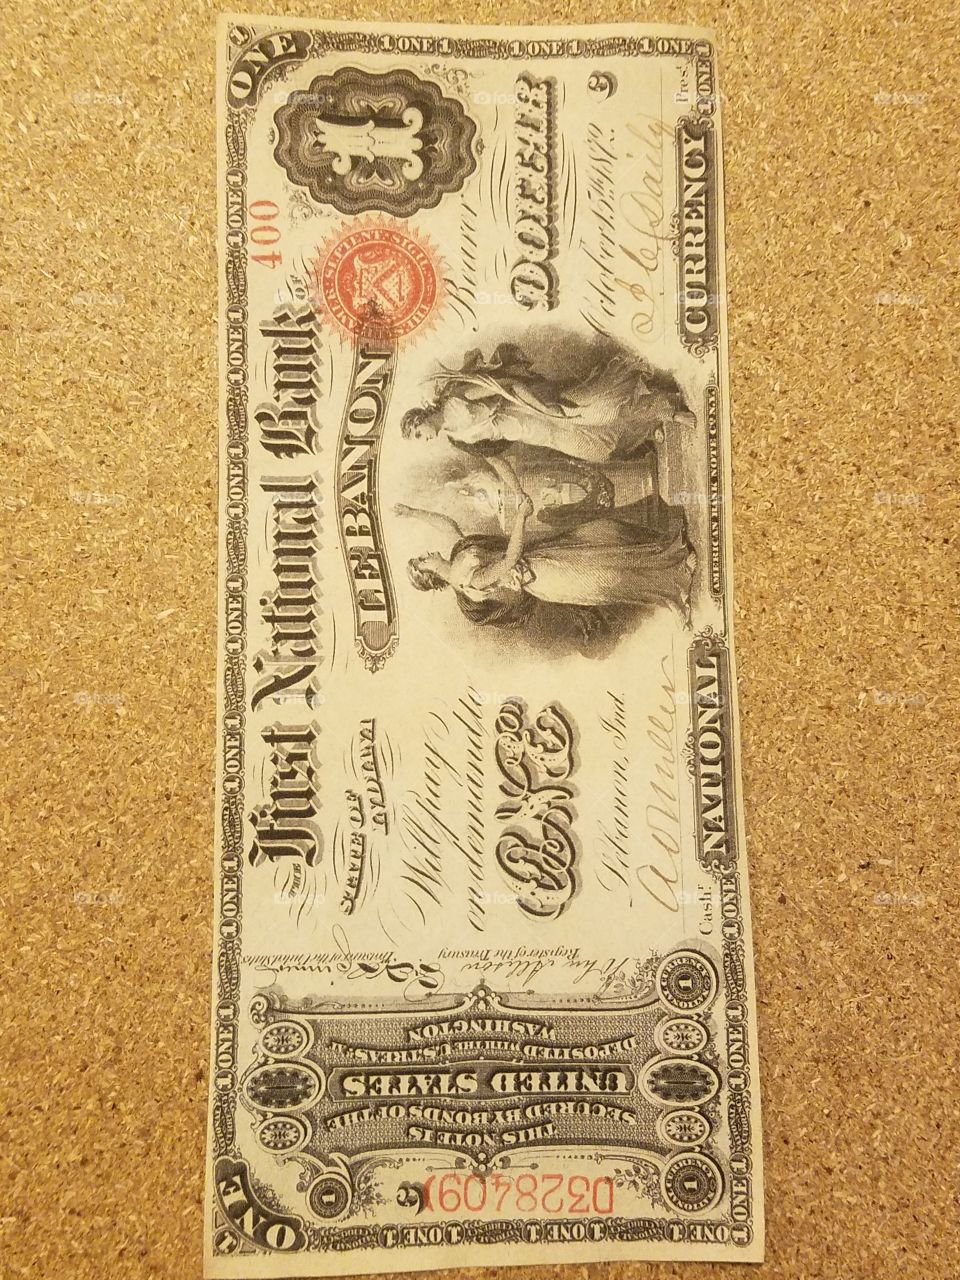 The First National Bank Of Lebanon in Indiana printed 2,000 sheets of $1 original series national bank notes in 1875. A print range between 1,000 and 2,500 making these a very rare find